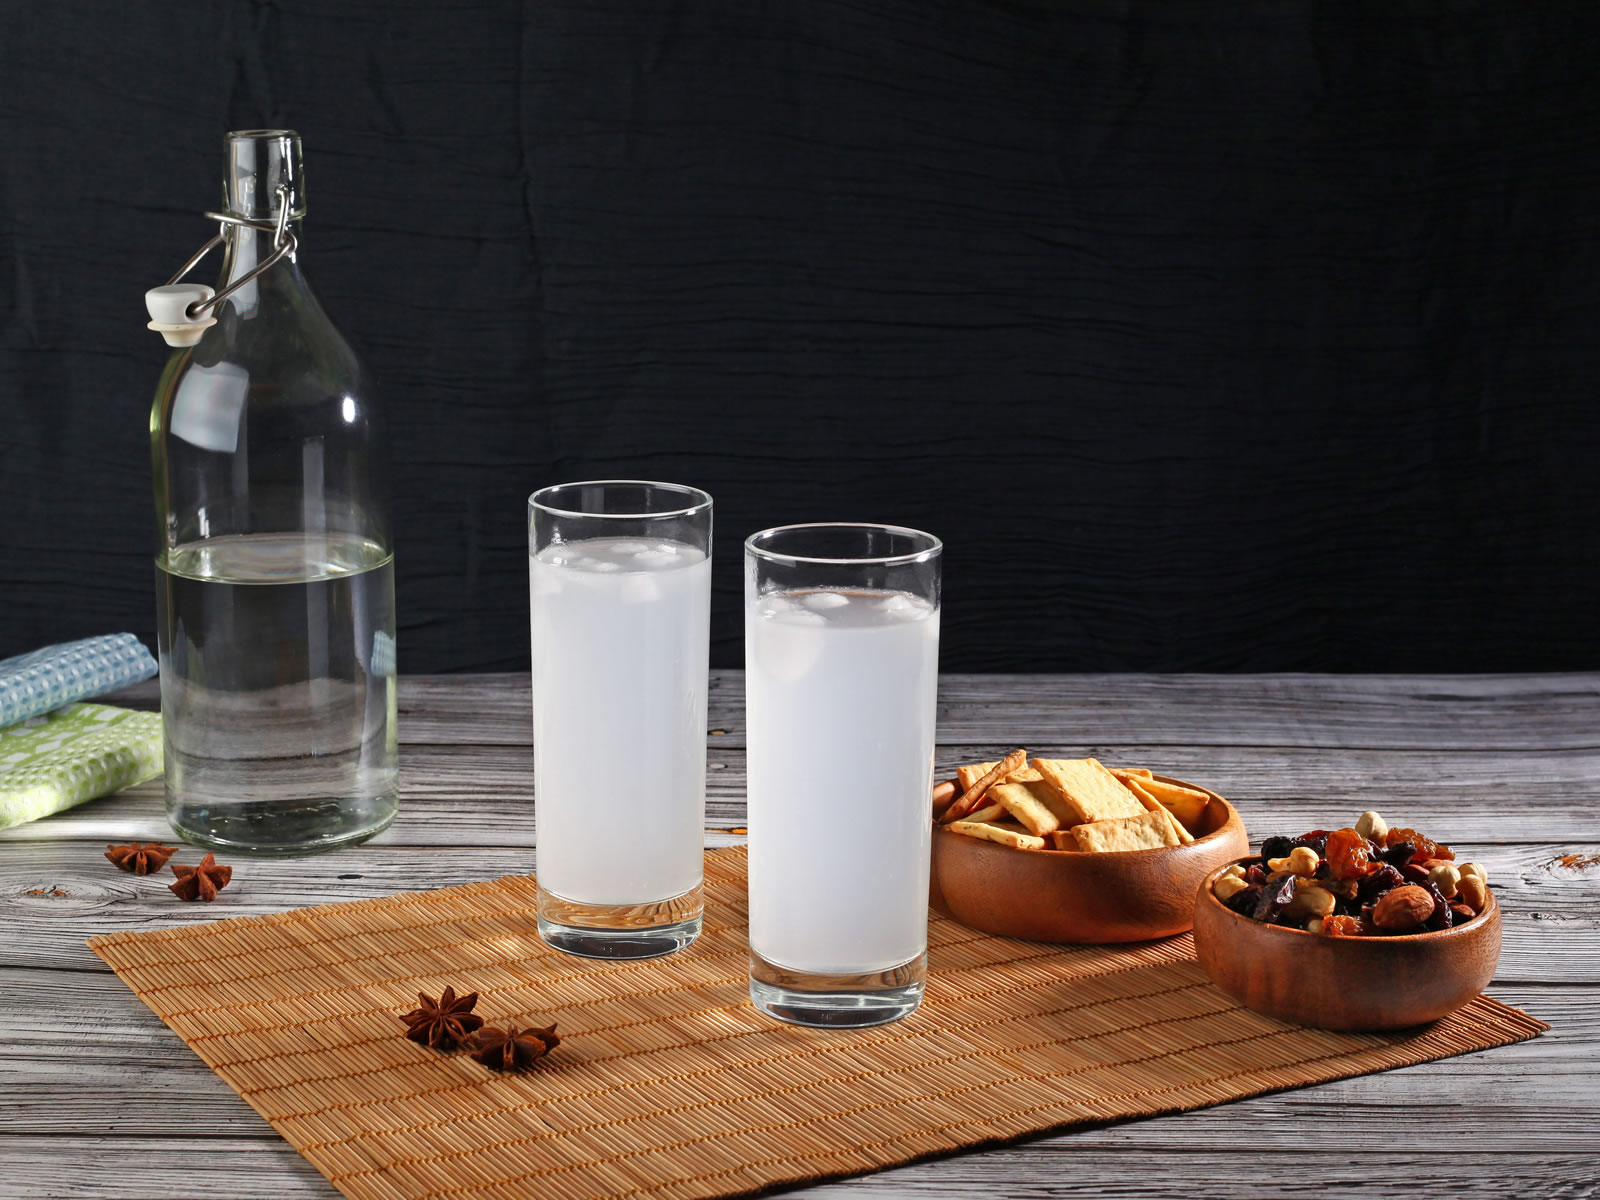 Two glasses of Turkish raki on a table with bowls of snacks and an open bottle of water in the background